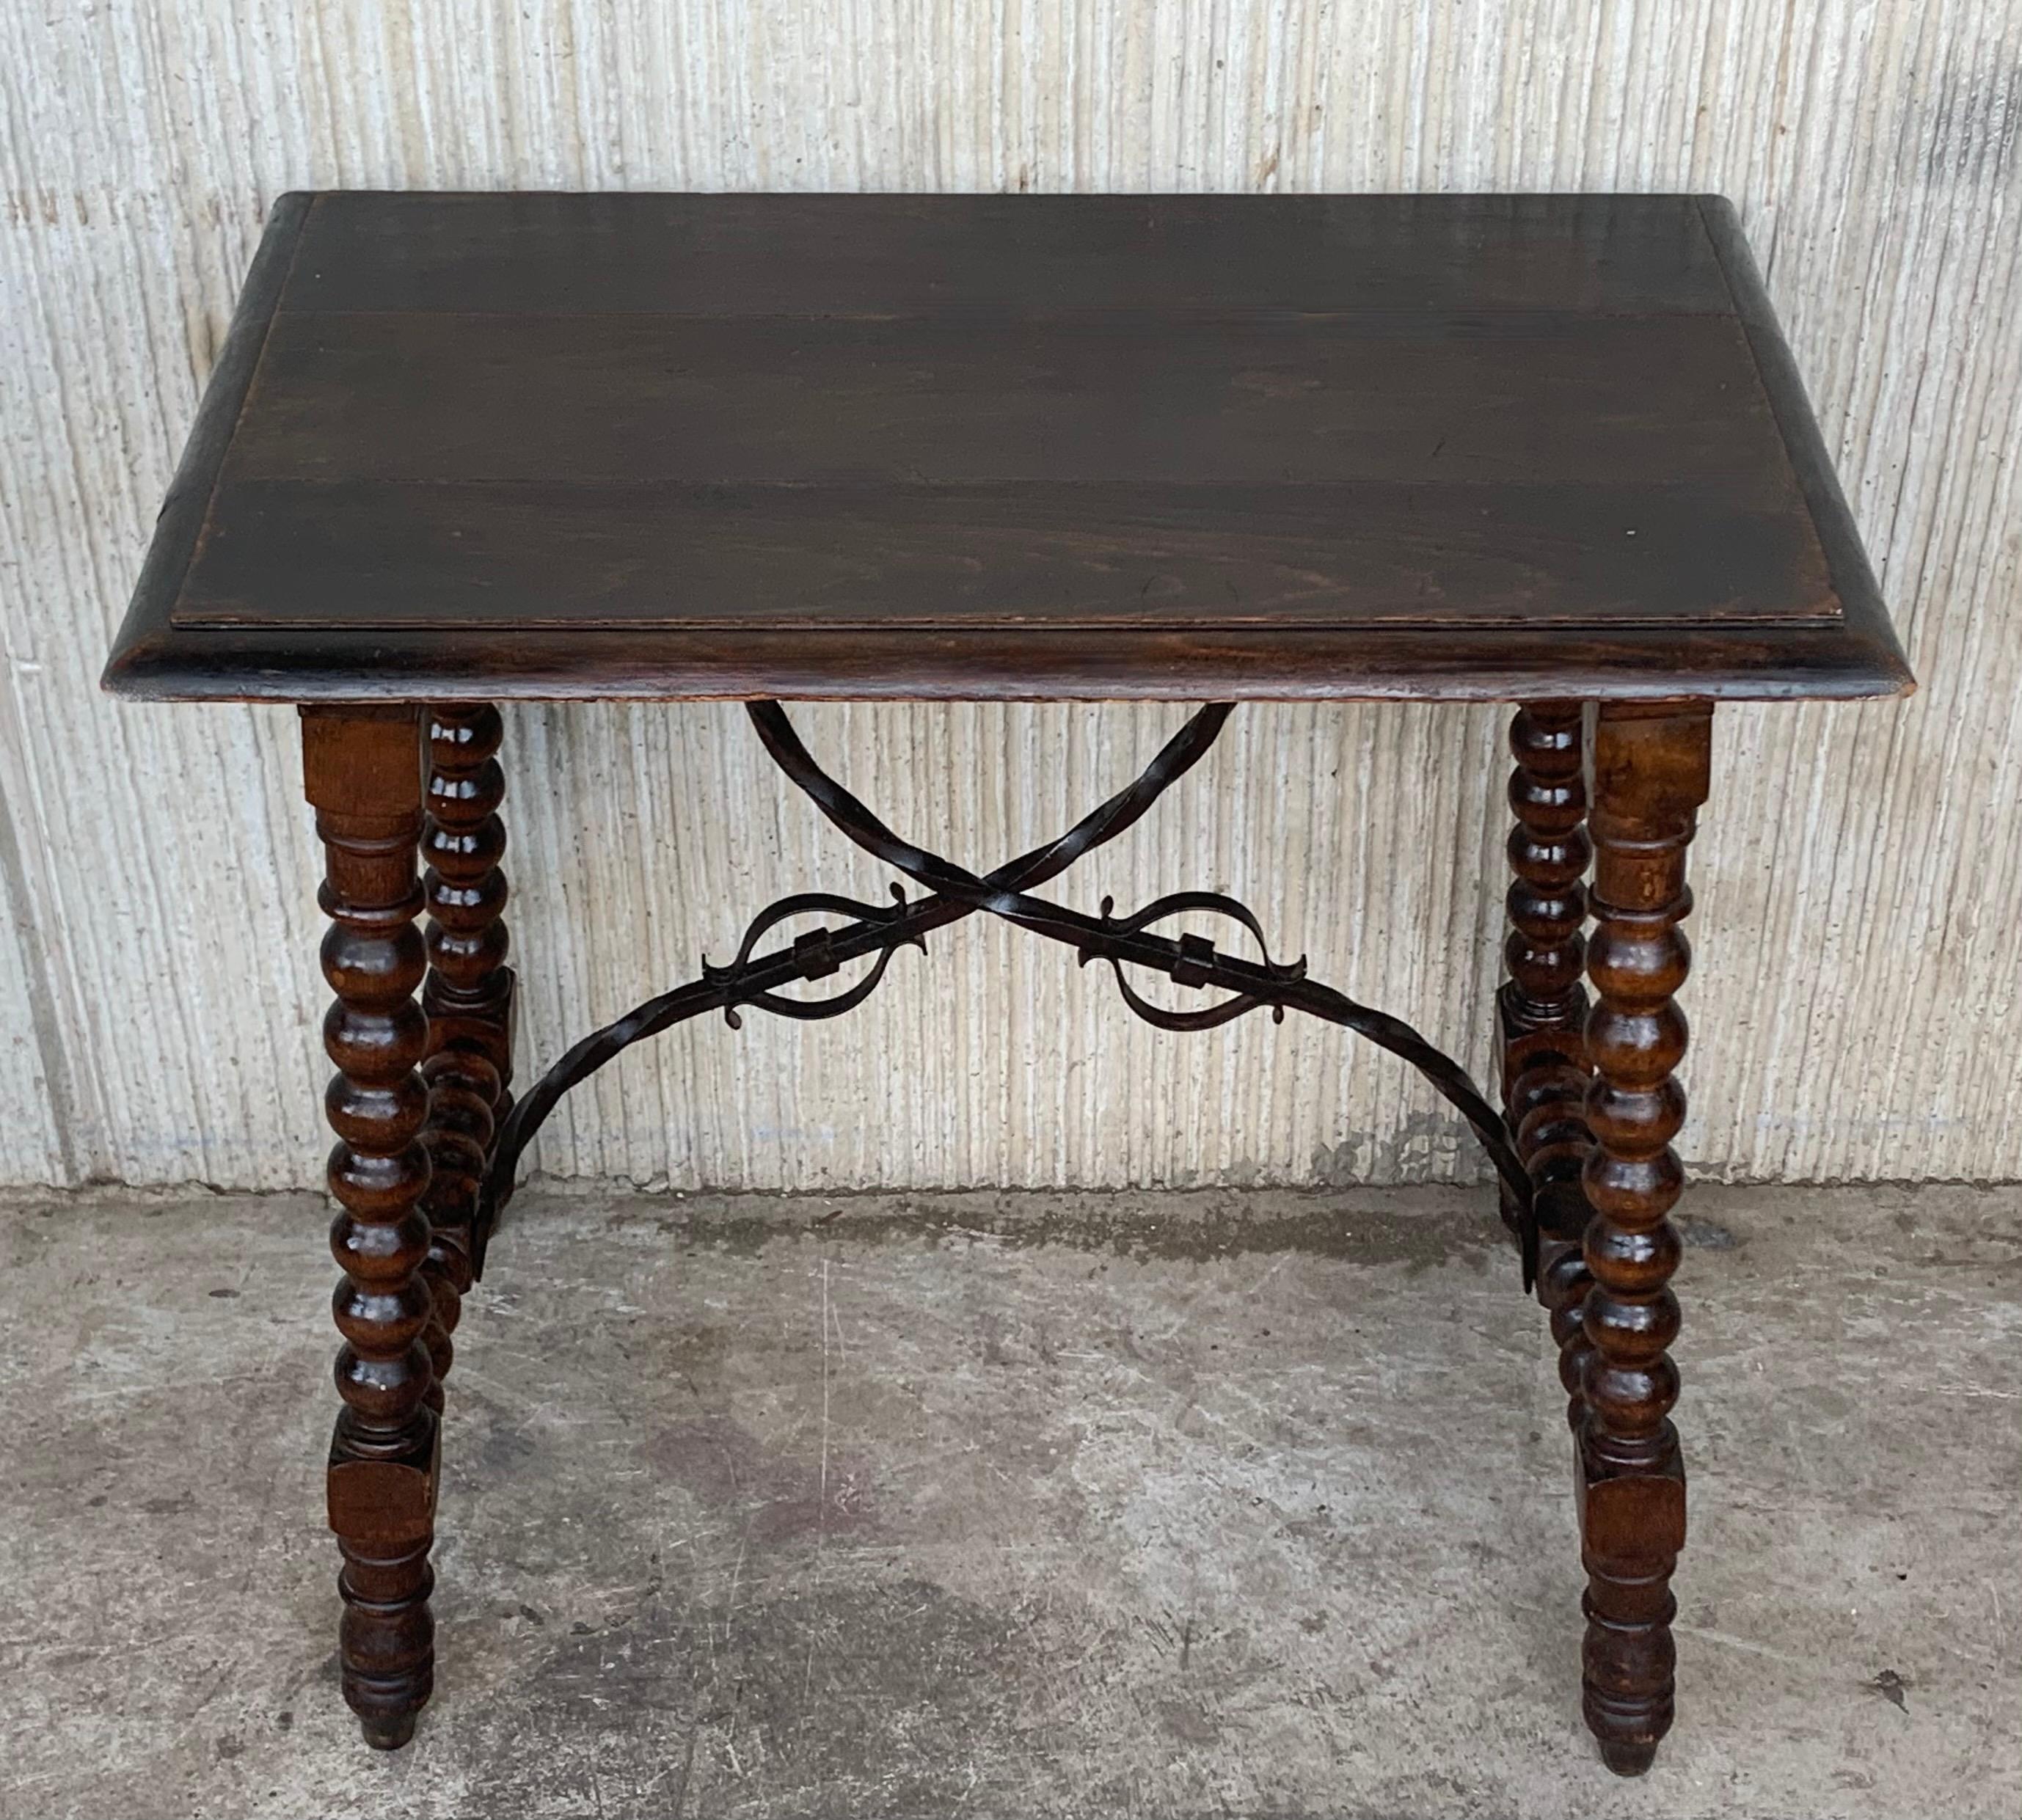 19th Spanish Walnut Side Table with Lyre Legs, Beleveled Top and Iron Stretcher In Good Condition For Sale In Miami, FL